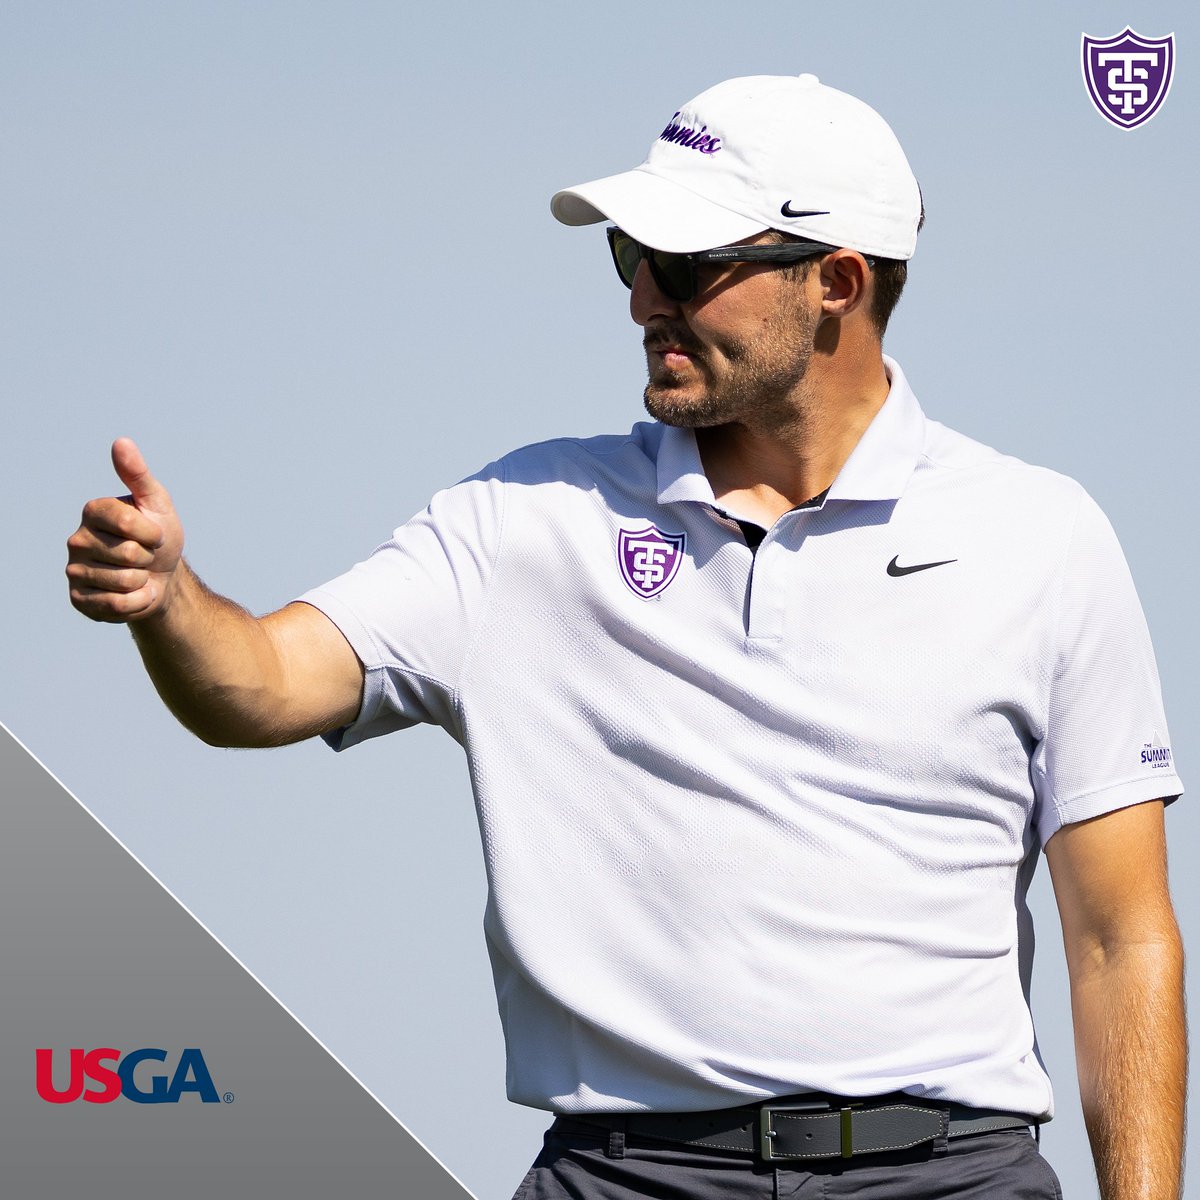 Our head coach @MattRachey also has a chance to qualify for this year's U.S. Open!

Matt will be shooting his 36 holes in Summit, New Jersey at Canoe Brook Country Club!

Congratulations and good luck!

#RollToms